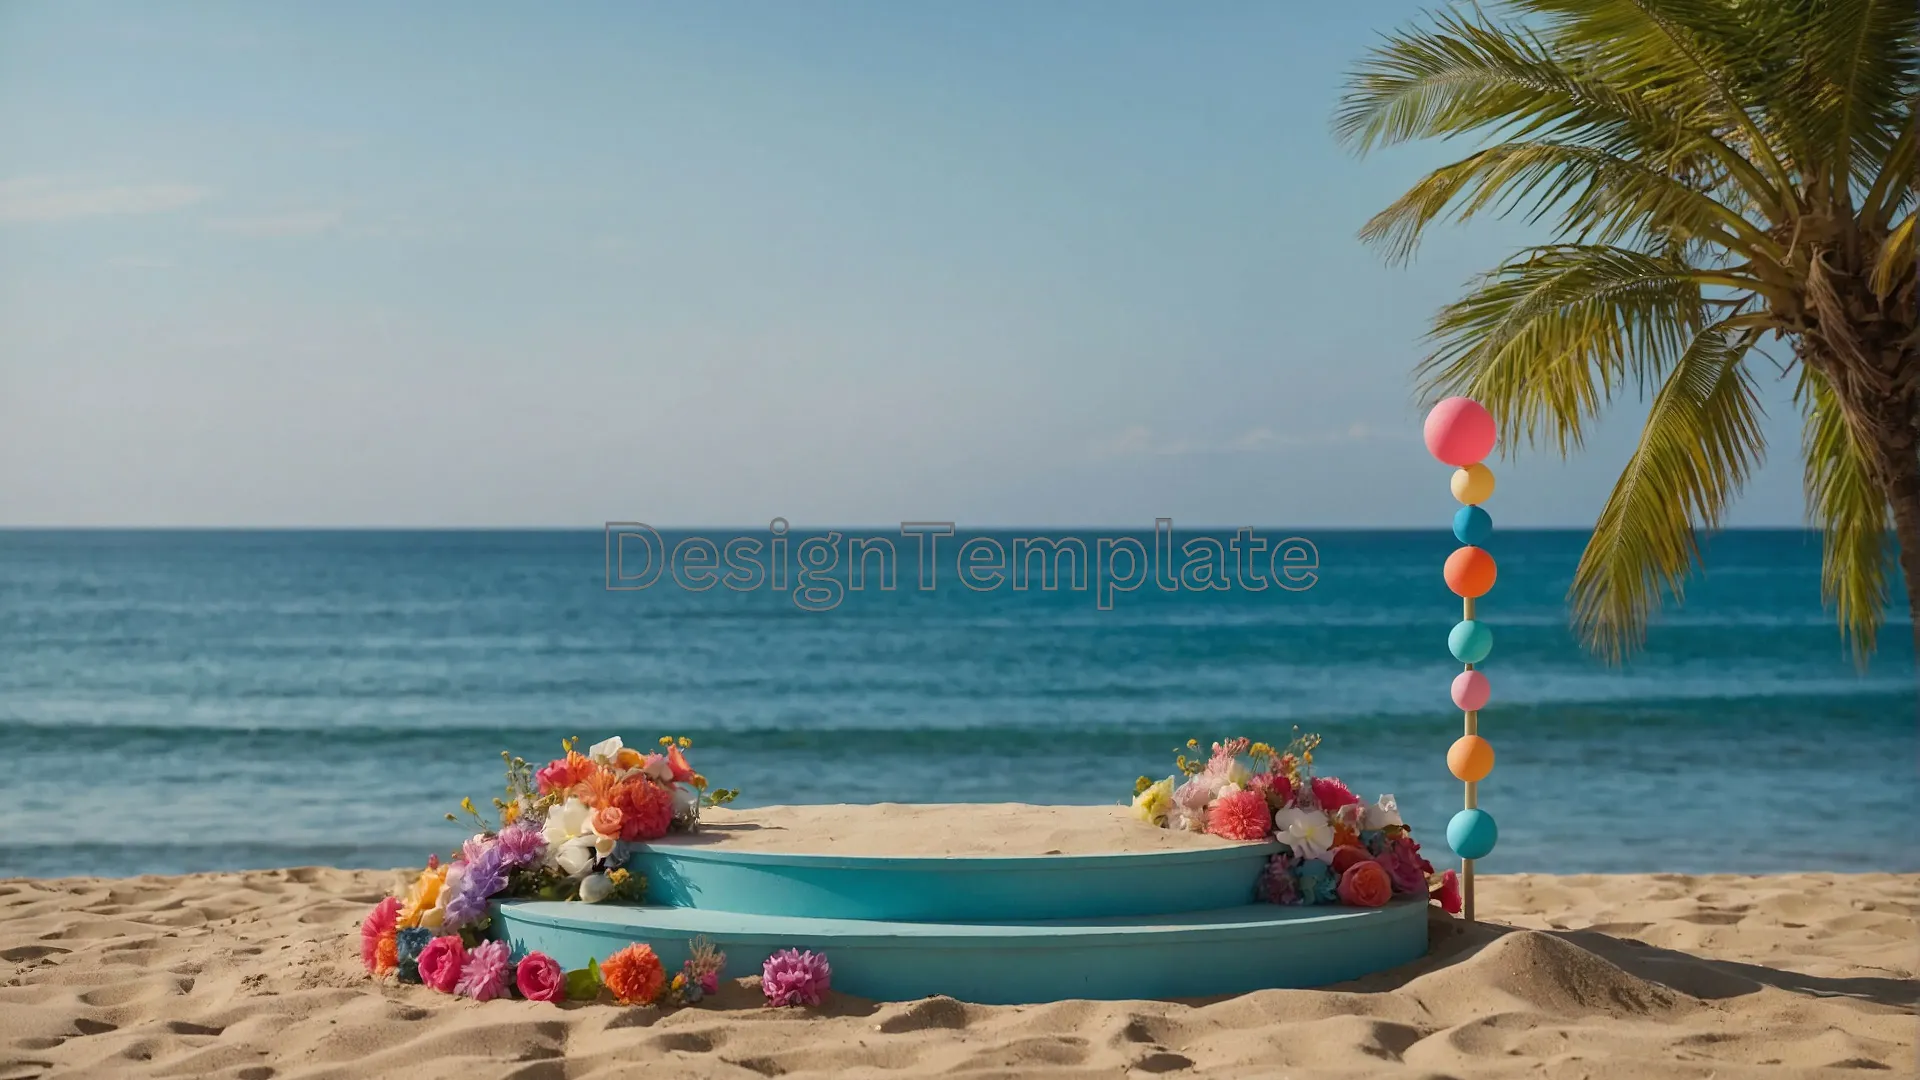 Vibrant 3D Circle Podium in Fresh Colors for a Stunning Summer Sale Photo image